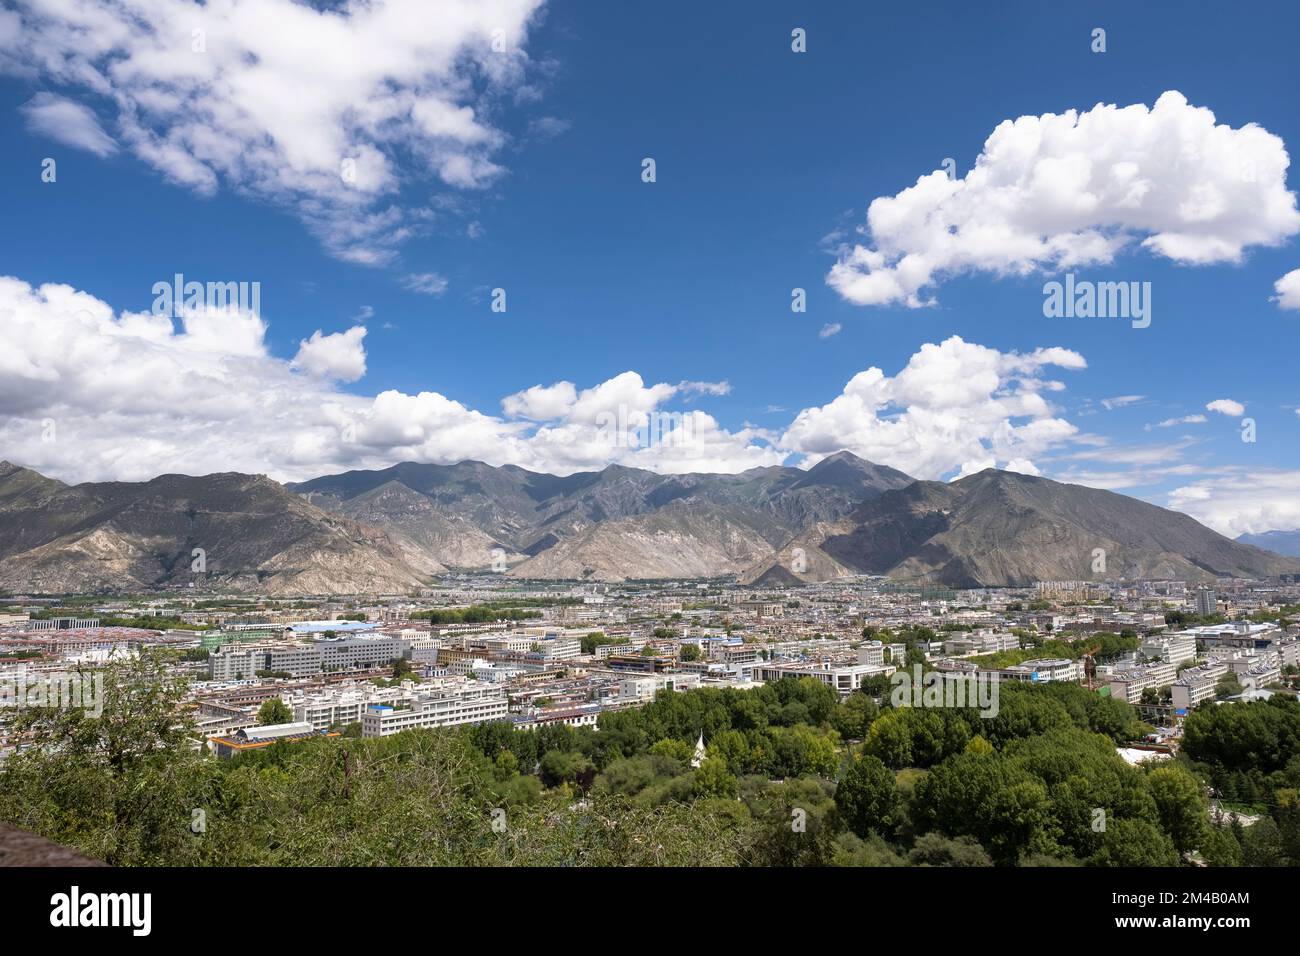 View of the city of Lhasa from the Potala Palace, a UNESCO heritage site. Tibet Autonomous Region. China. Stock Photo